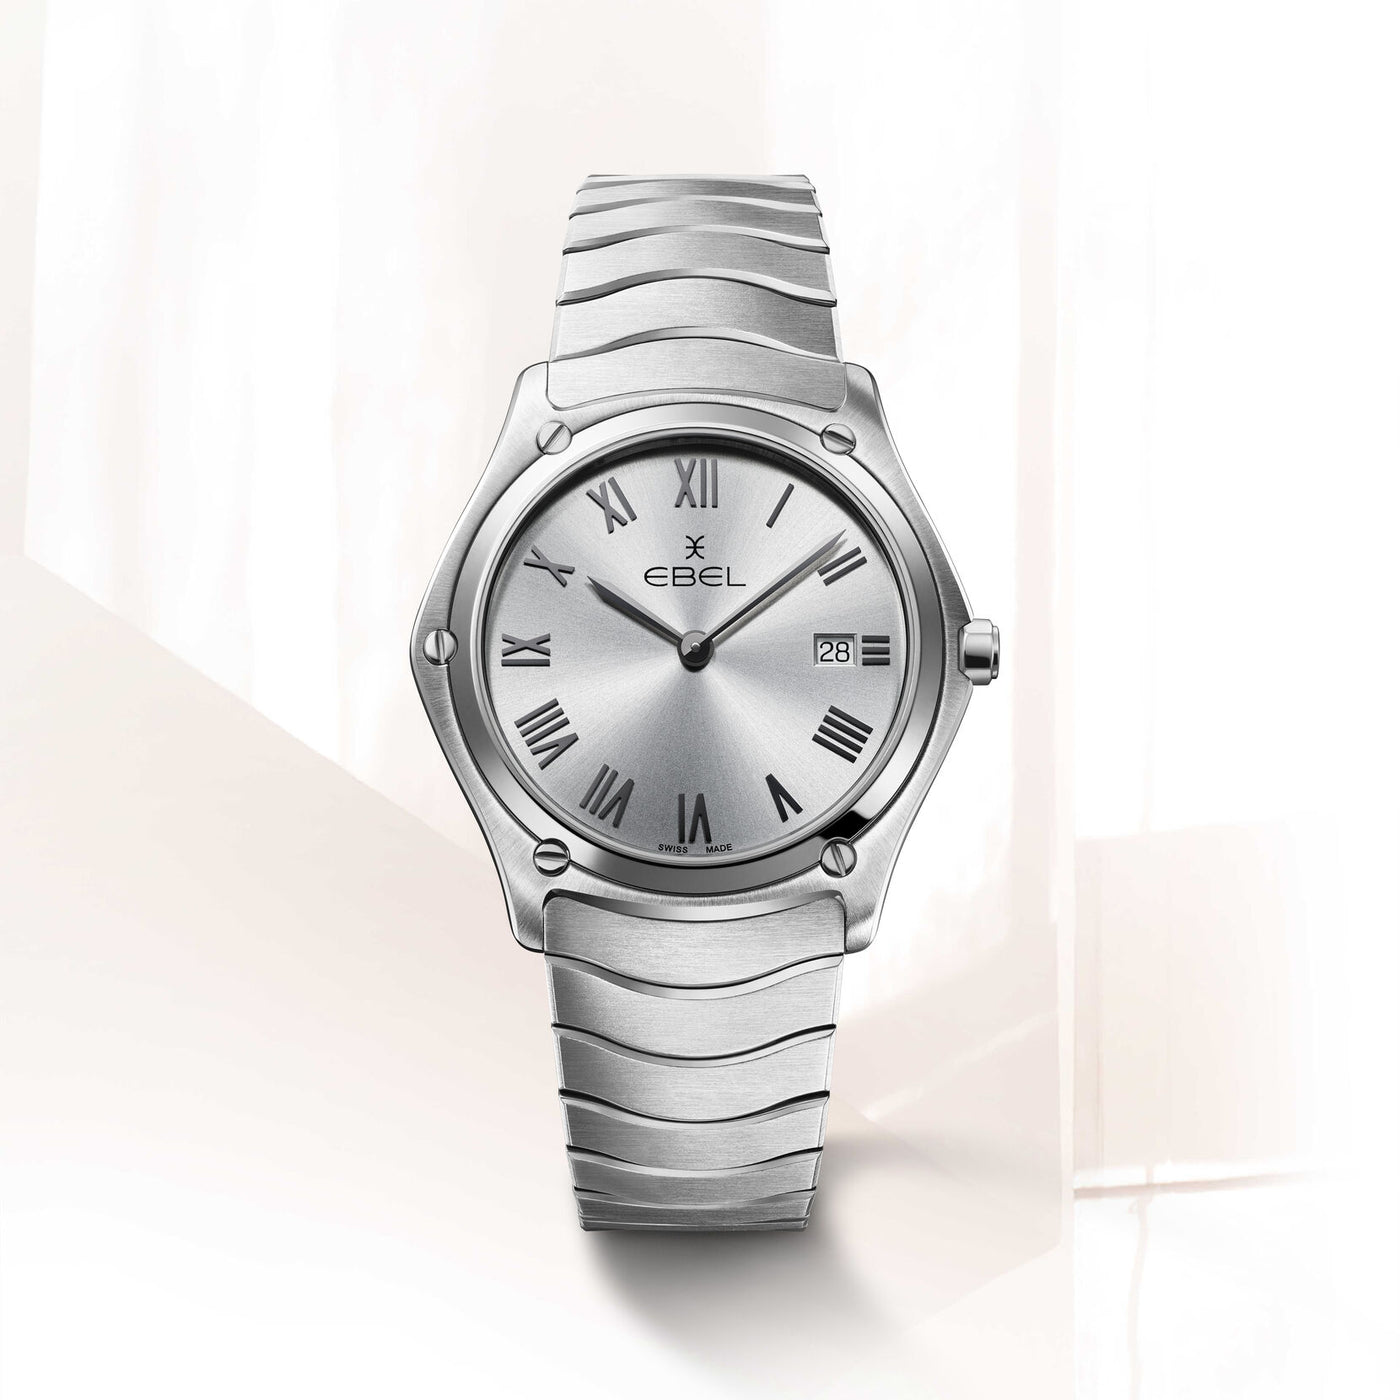 Ebel Sport Classic - Gharyal by Collectibles 